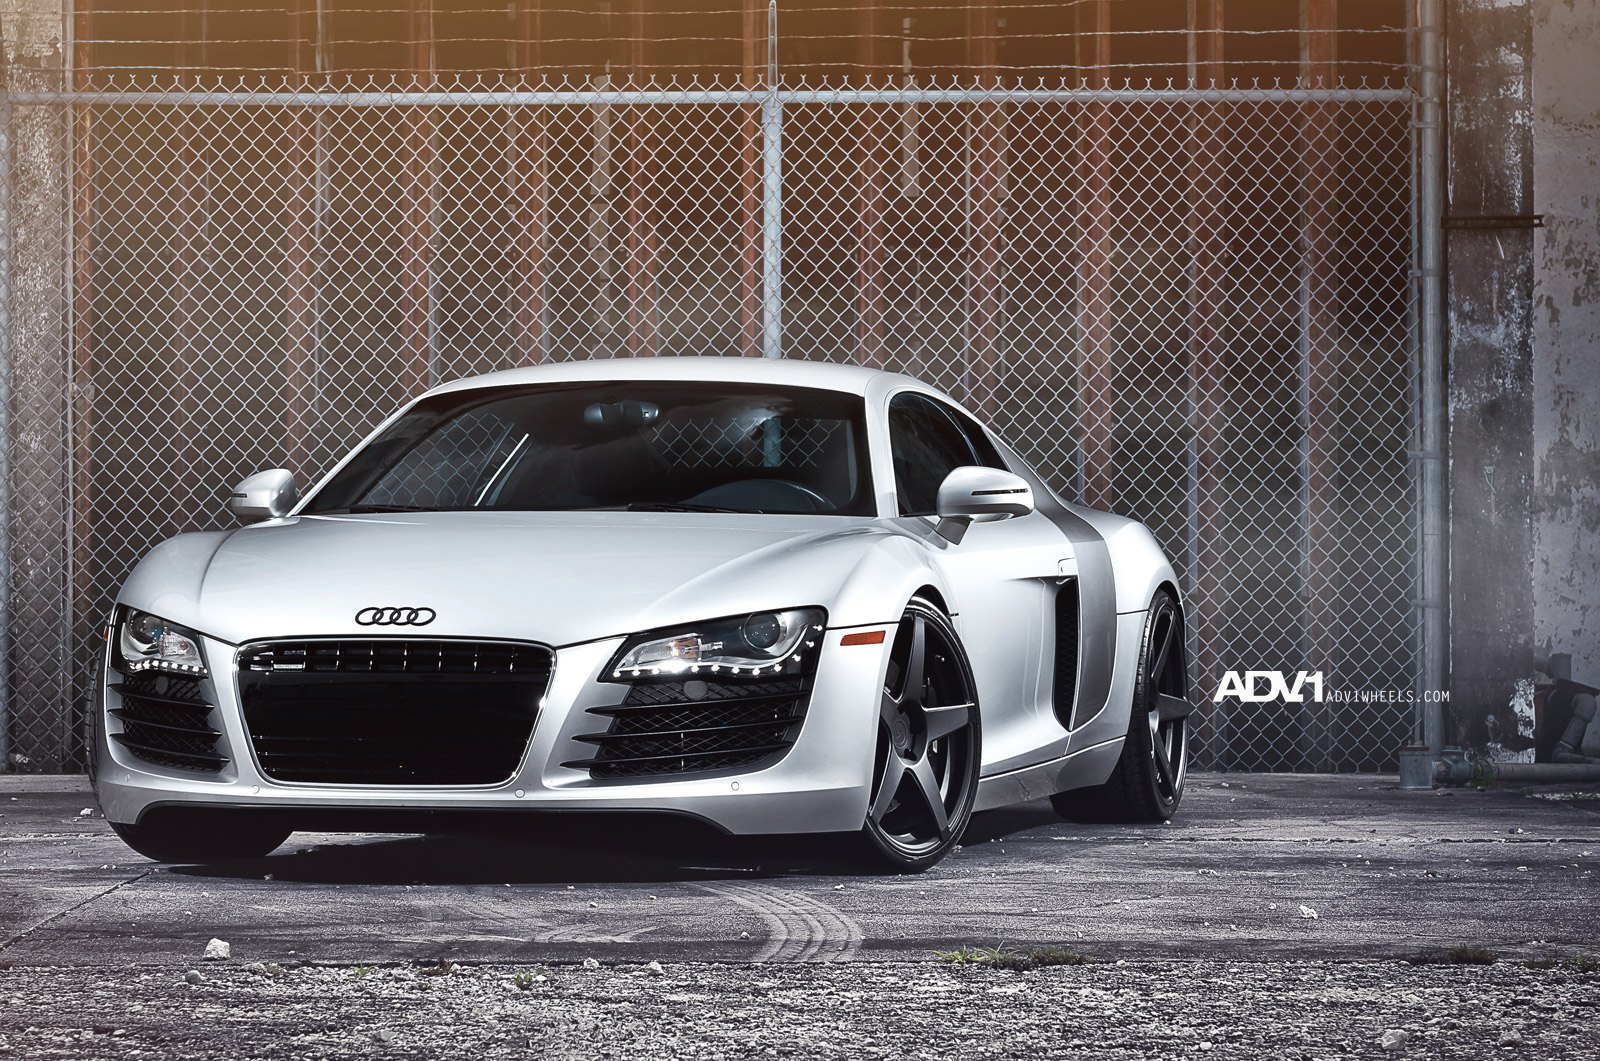 Silver Audi R8 with Aftermarket LED Headlights - Photo by ADV.1